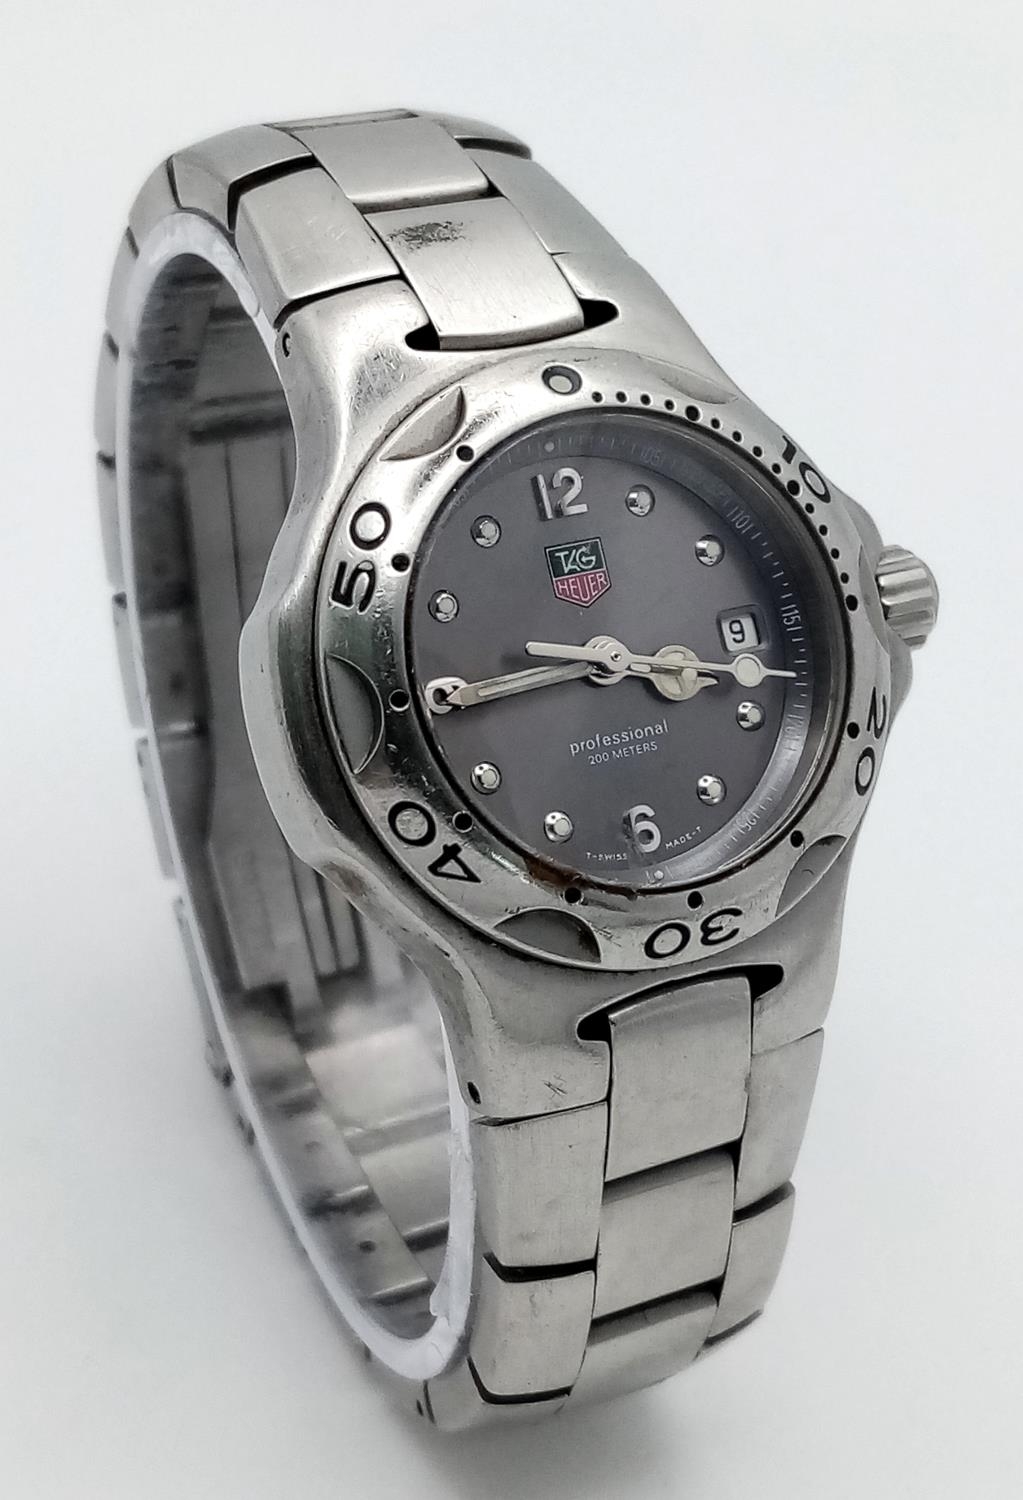 A Tag Heuer Professional Ladies Quartz Watch. Stainless steel bracelet and case - 28mm. Grey dial - Image 3 of 8